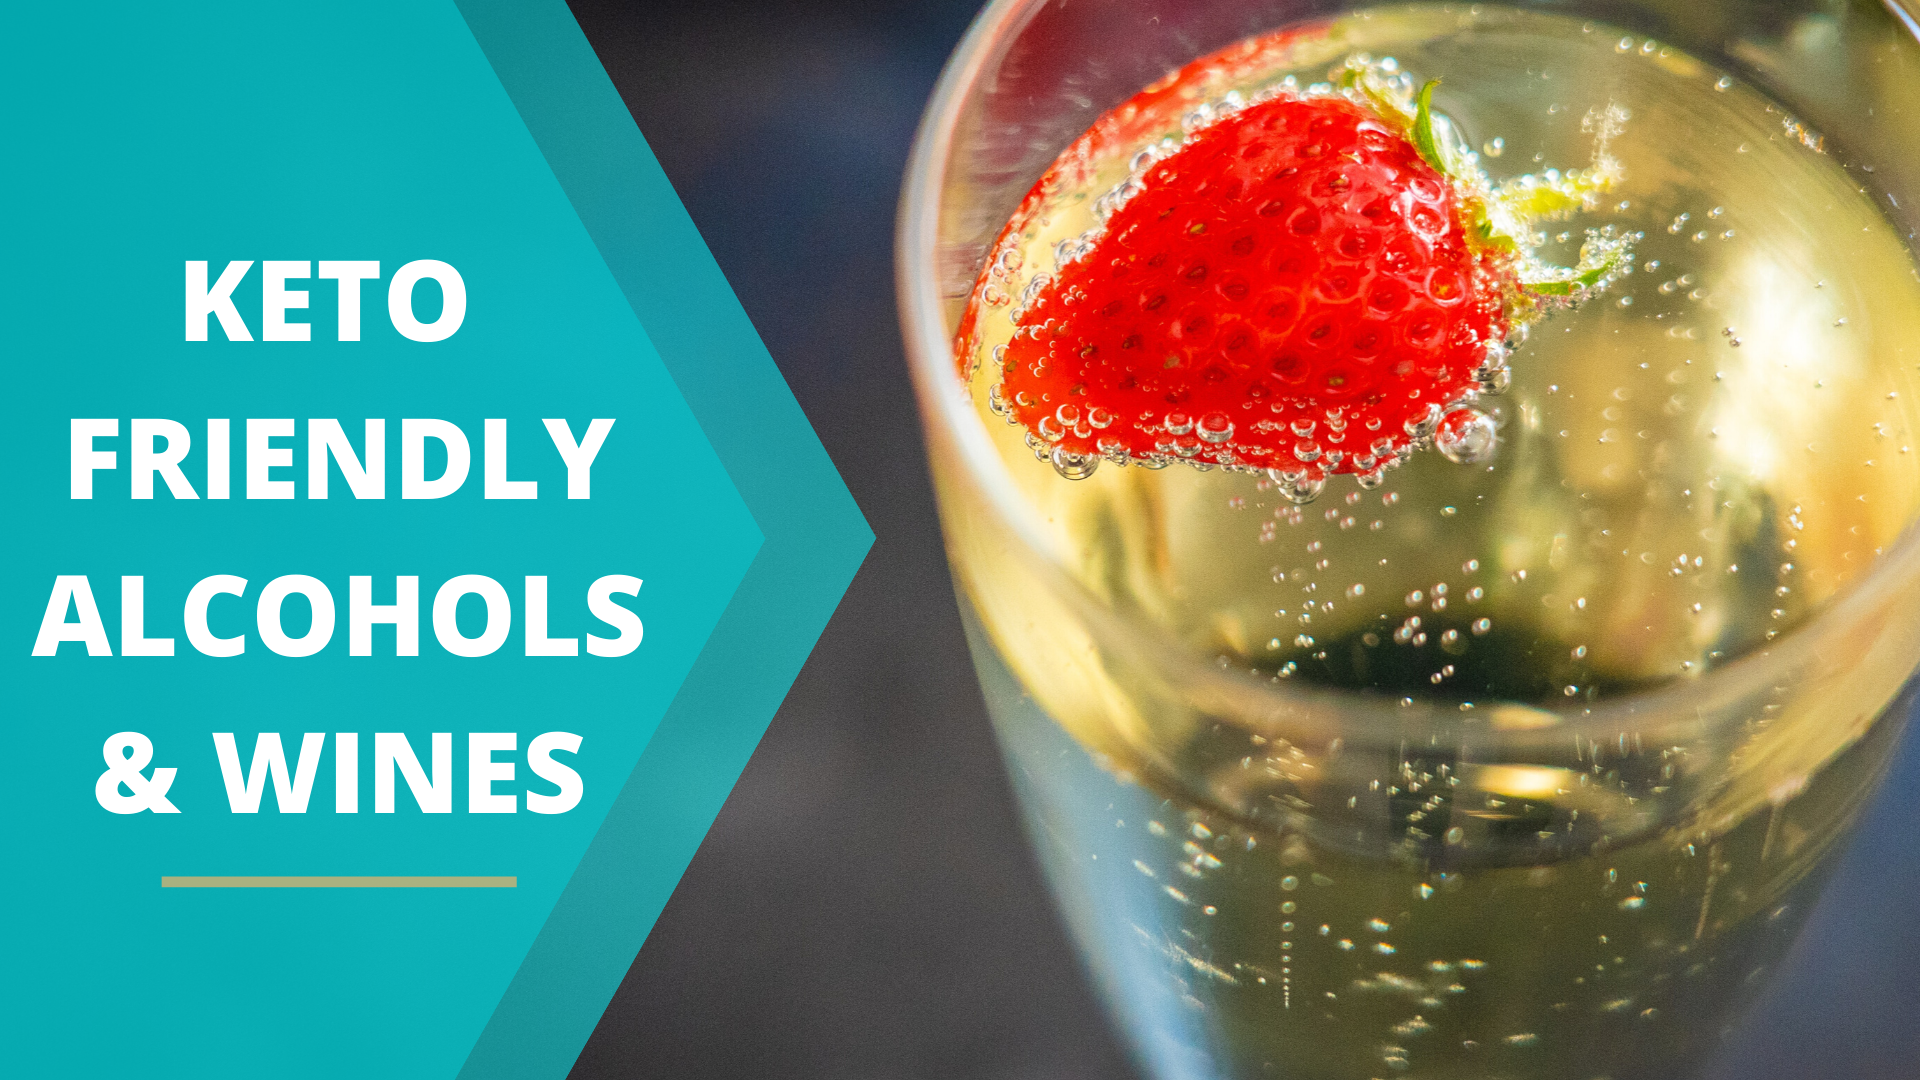 Alcohols & Wines That Are Keto Diet Friendly